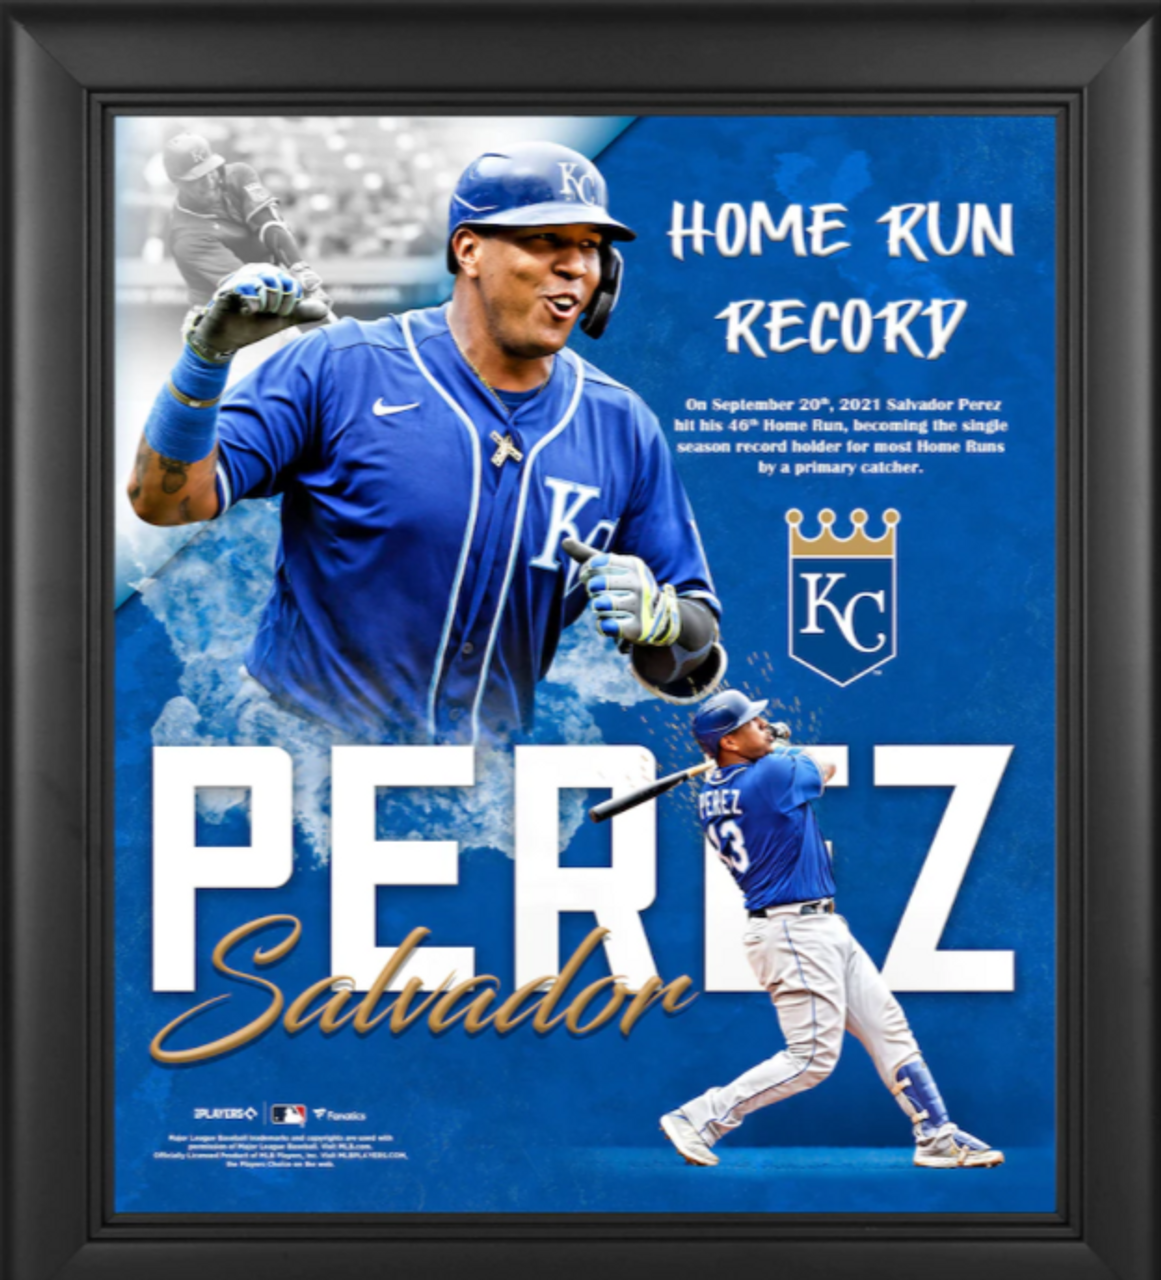 Salvador Perez Kansas City Royals Framed 15 x 17 Most Home Runs in a  Season by a Catcher Collage